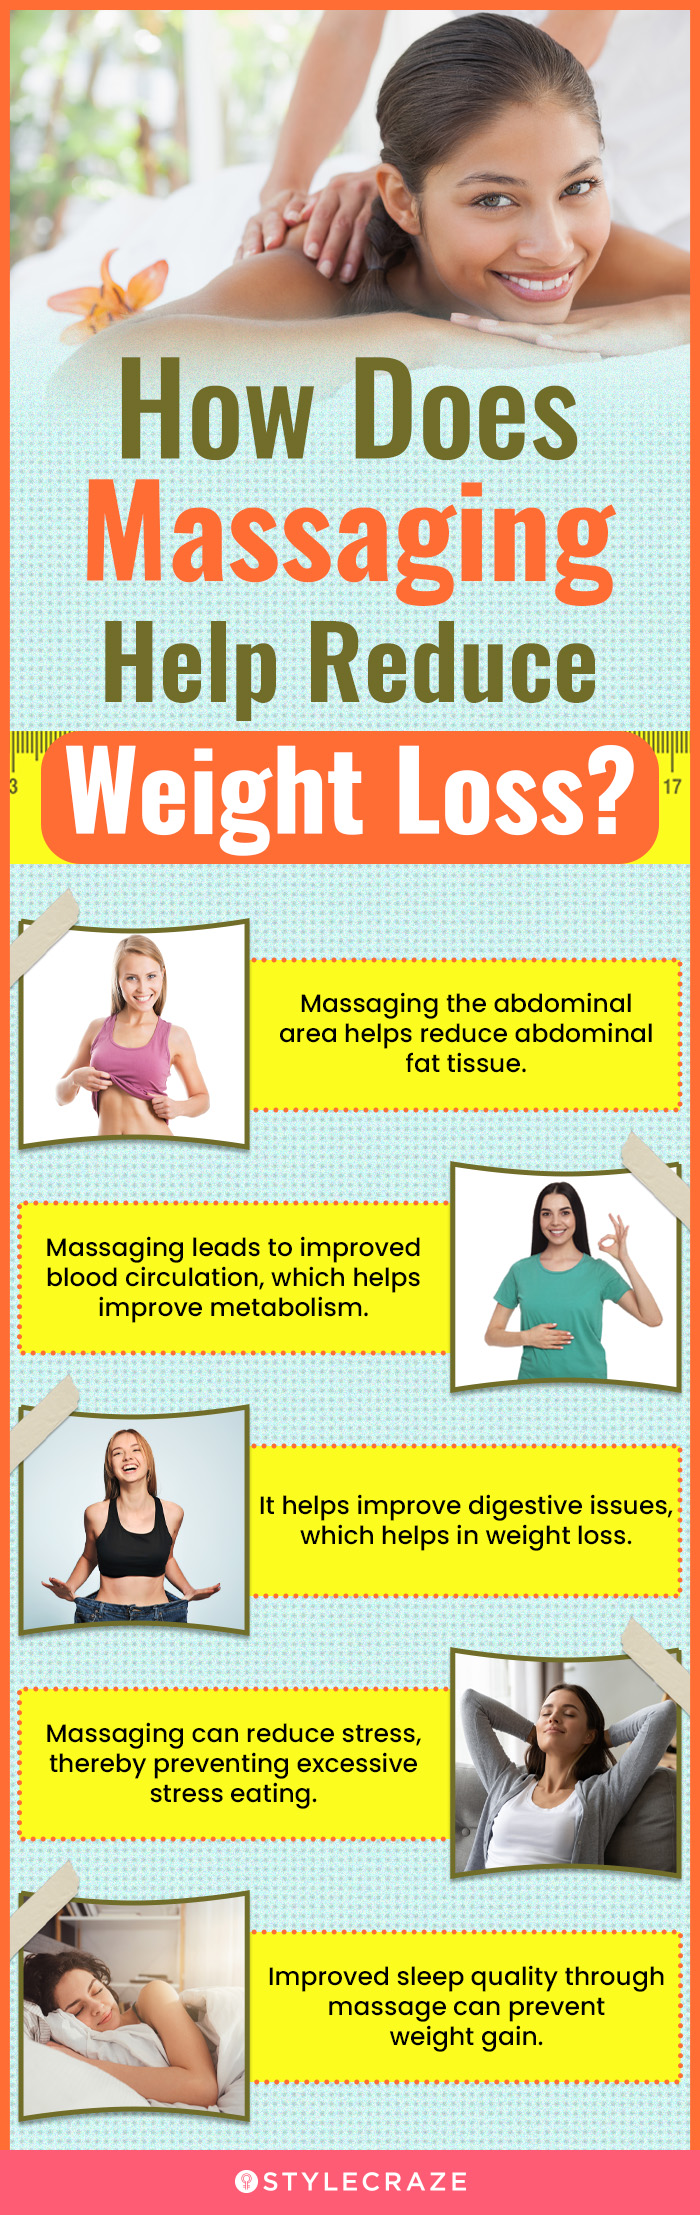 how does massaging help reduce weight loss (infographic)